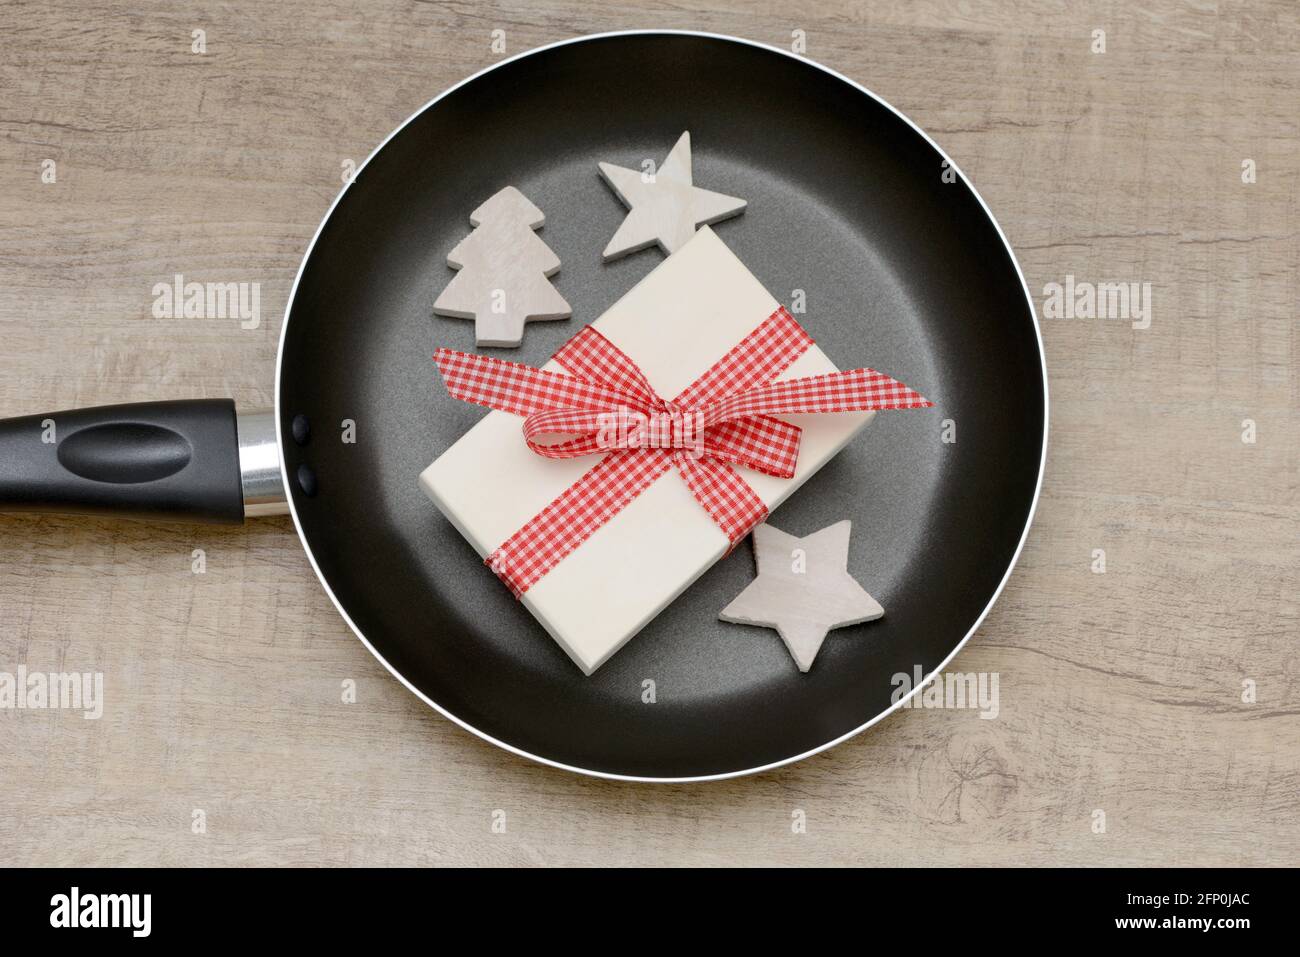 frying pan and present on wooden table Stock Photo